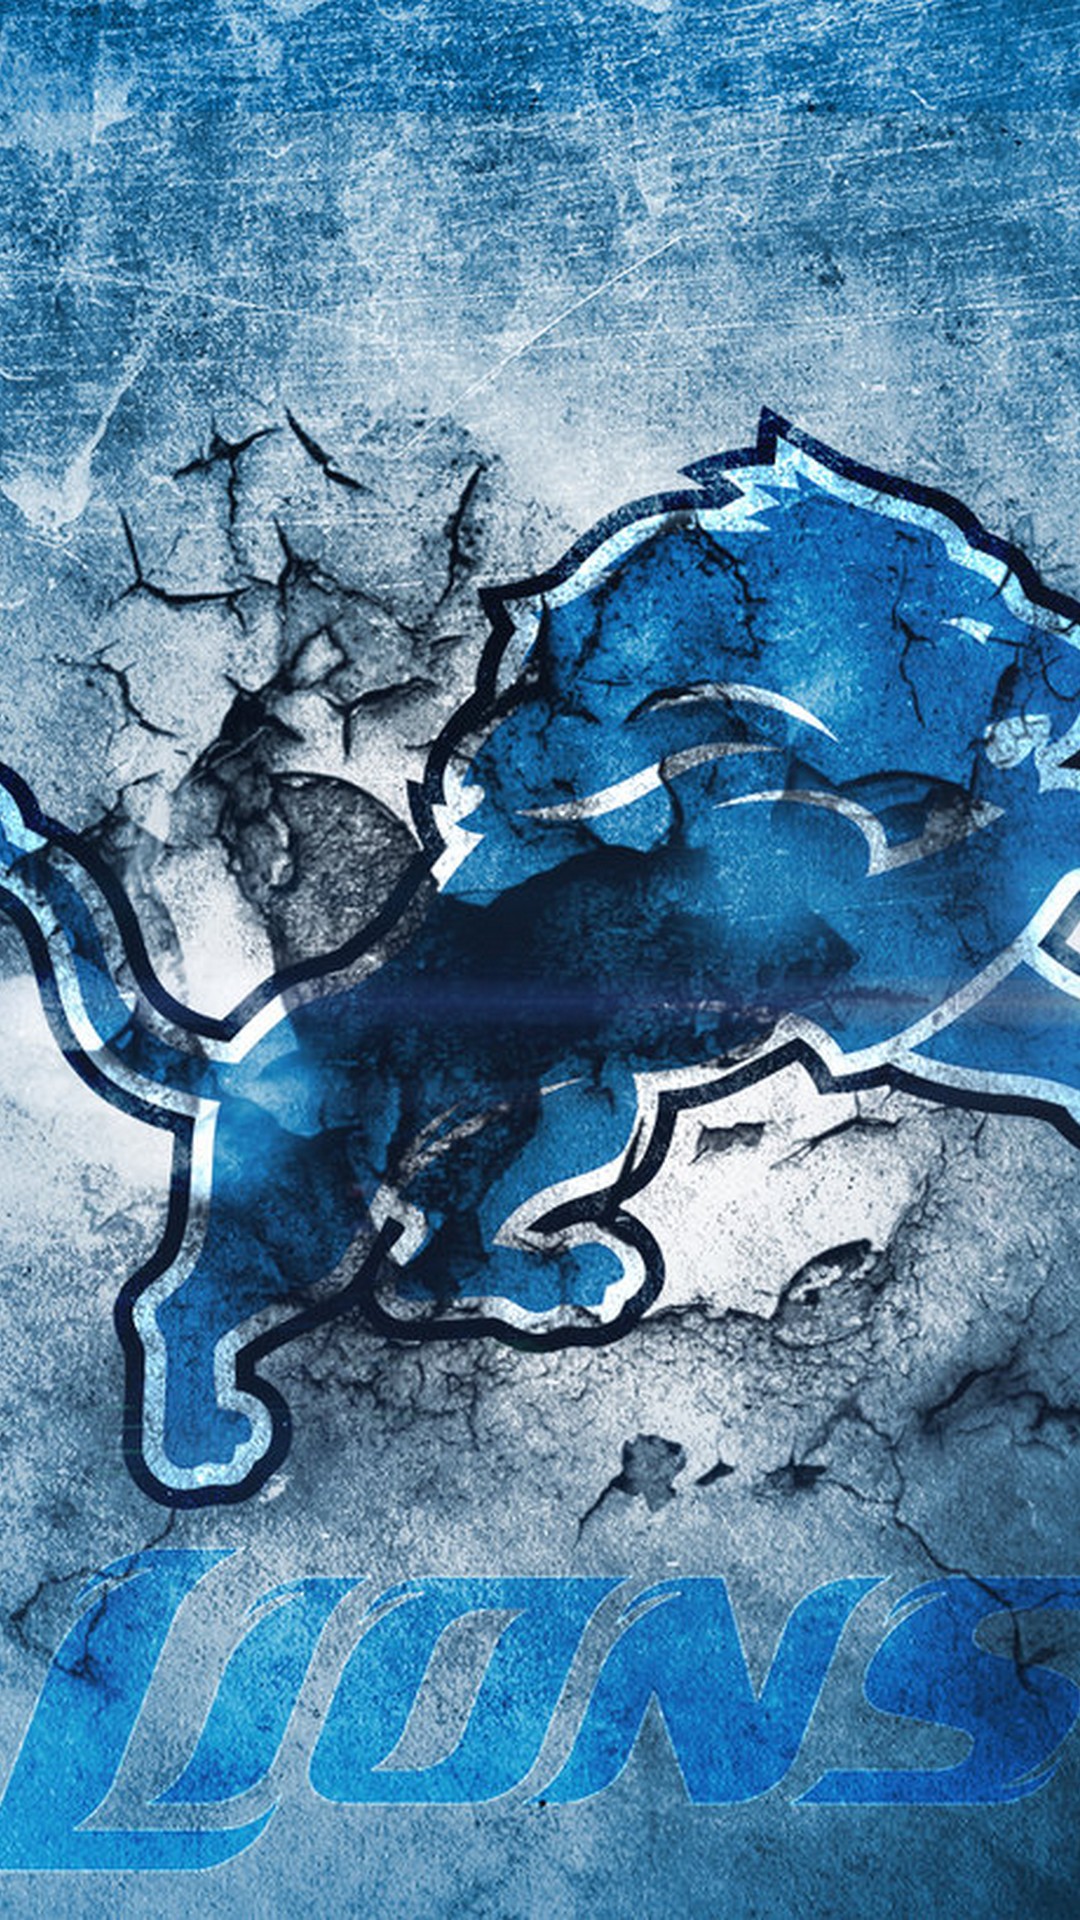 Detroit Lions iPhone Wallpaper with high-resolution 1080x1920 pixel. Download and set as wallpaper for Apple iPhone X, XS Max, XR, 8, 7, 6, SE, iPad, Android